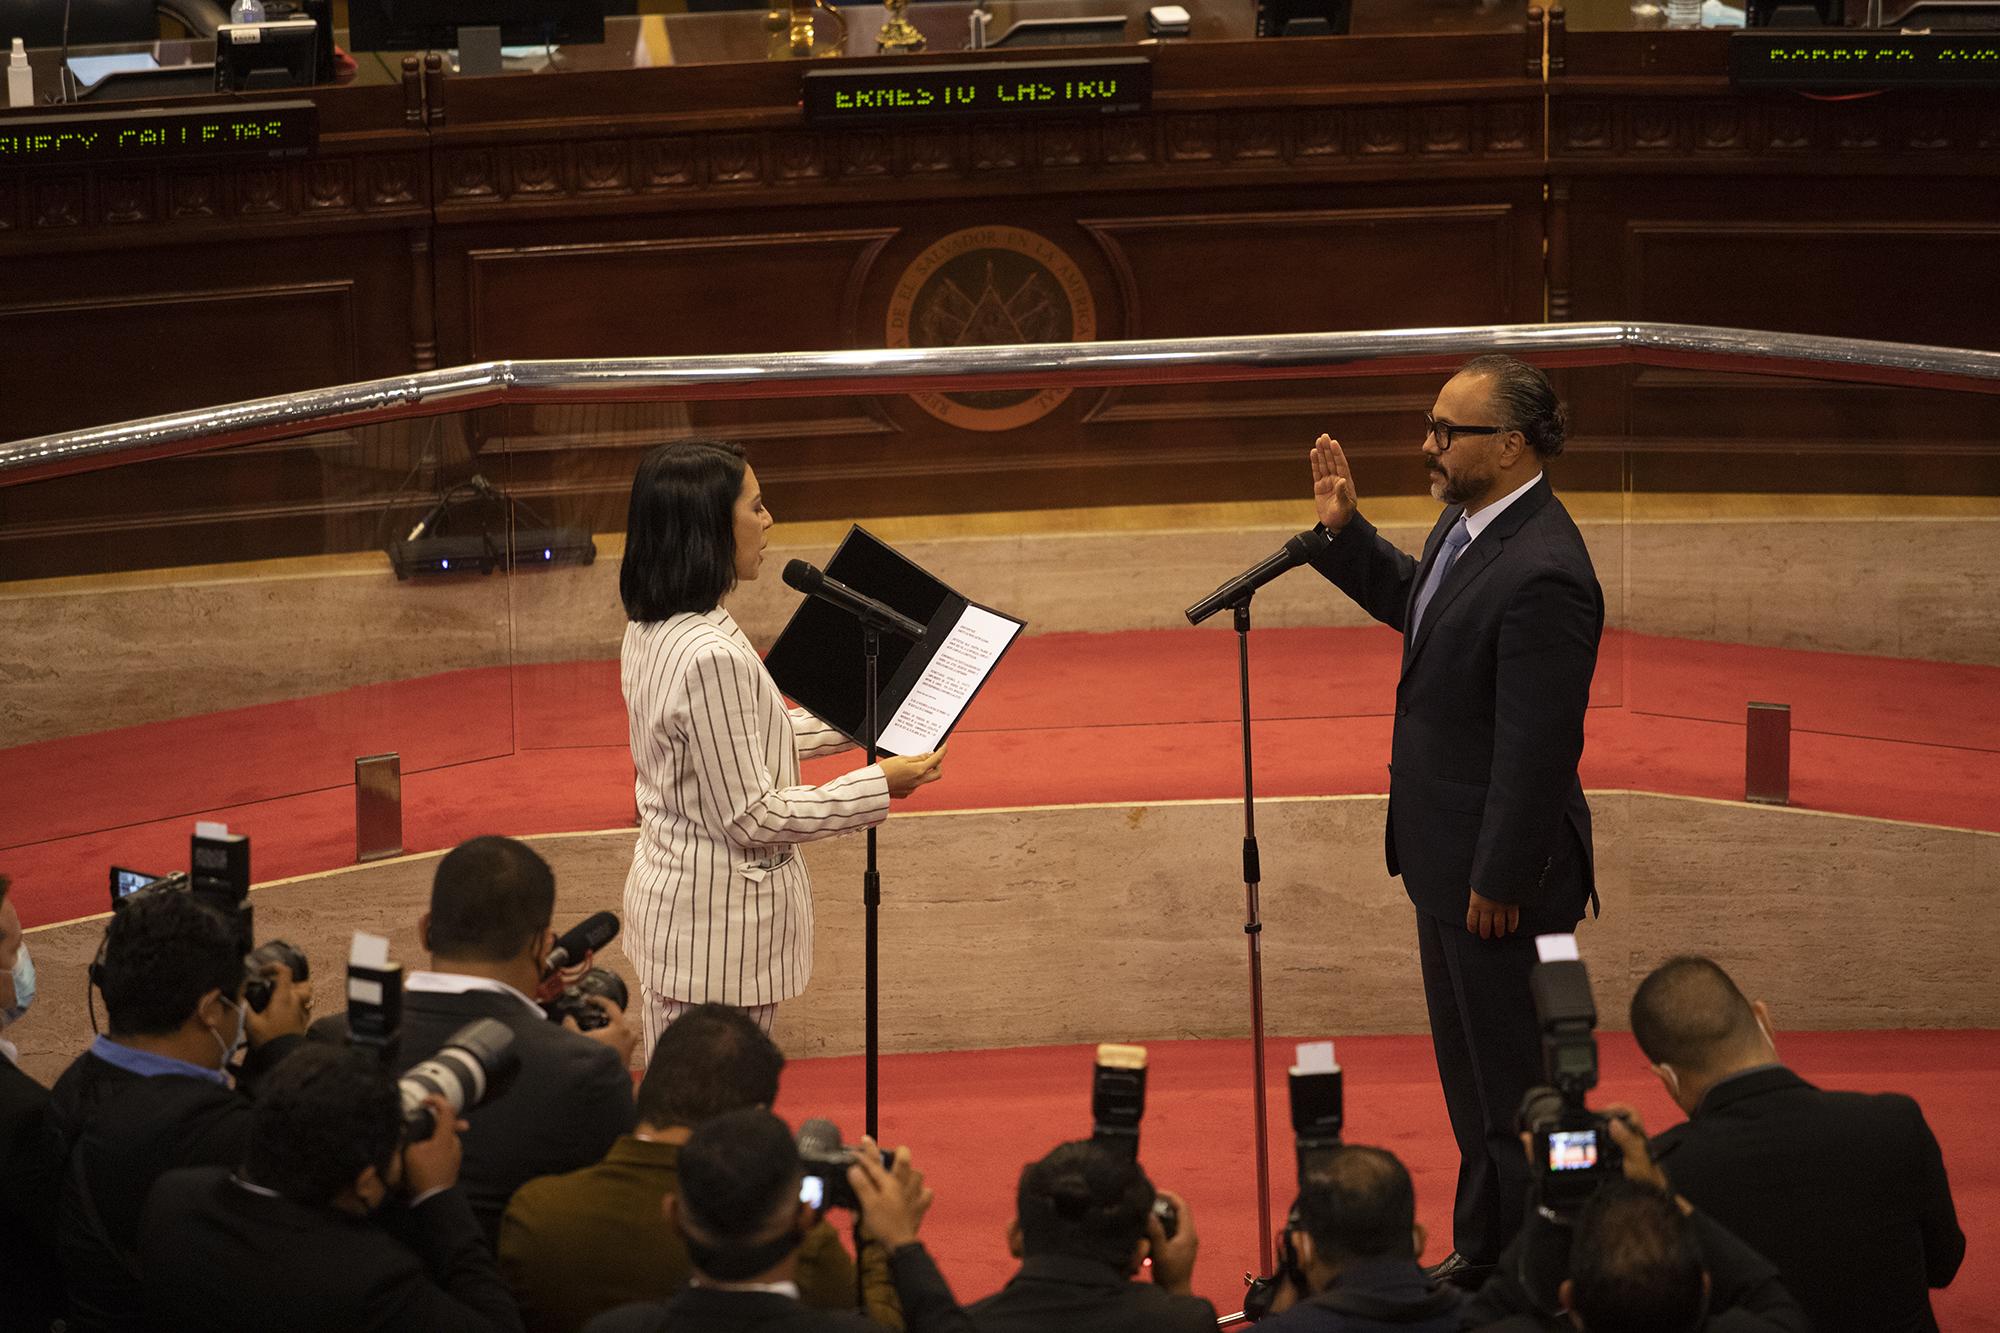 Suecy Callejas swore in Nuevas Ideas deputy Ernesto Castro as the new president of the Assembly. The Assembly’s executive committee was divvied up between Nuevas Ideas and its allies. Photo: Carlos Barrera/El Faro